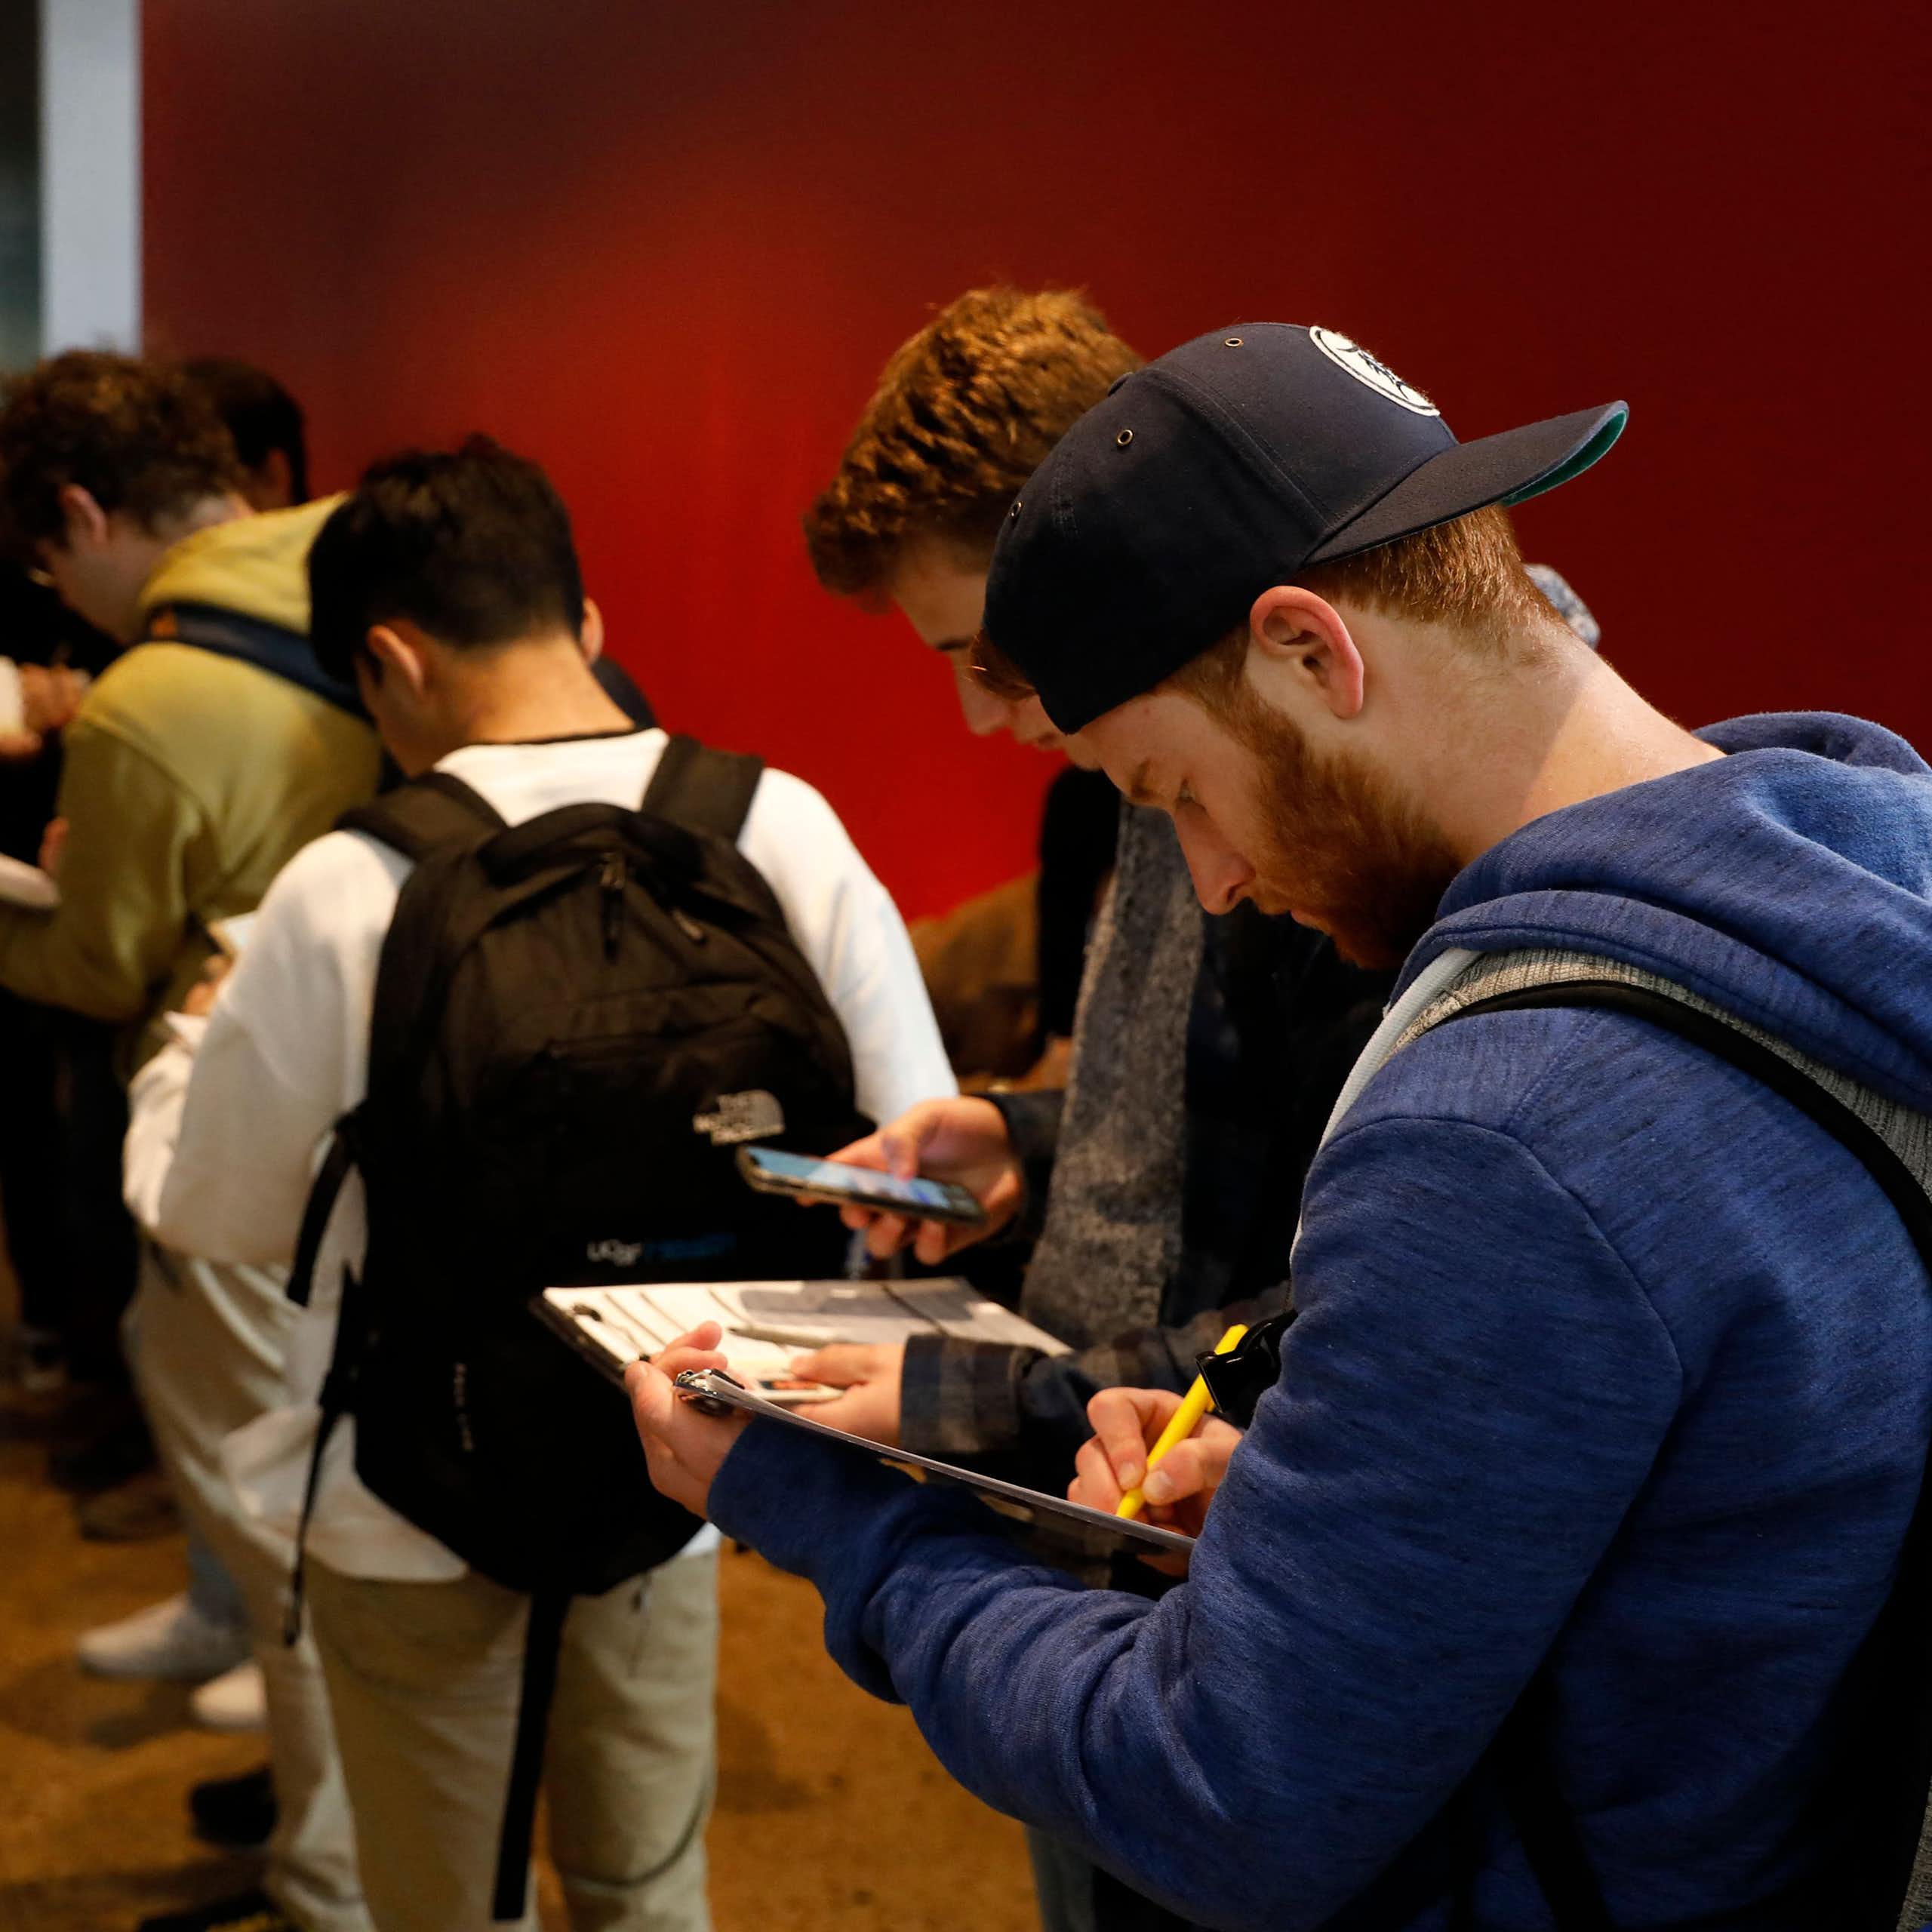 A row of young people stand inside a room with a red wall and look down at clipboards and white paper.